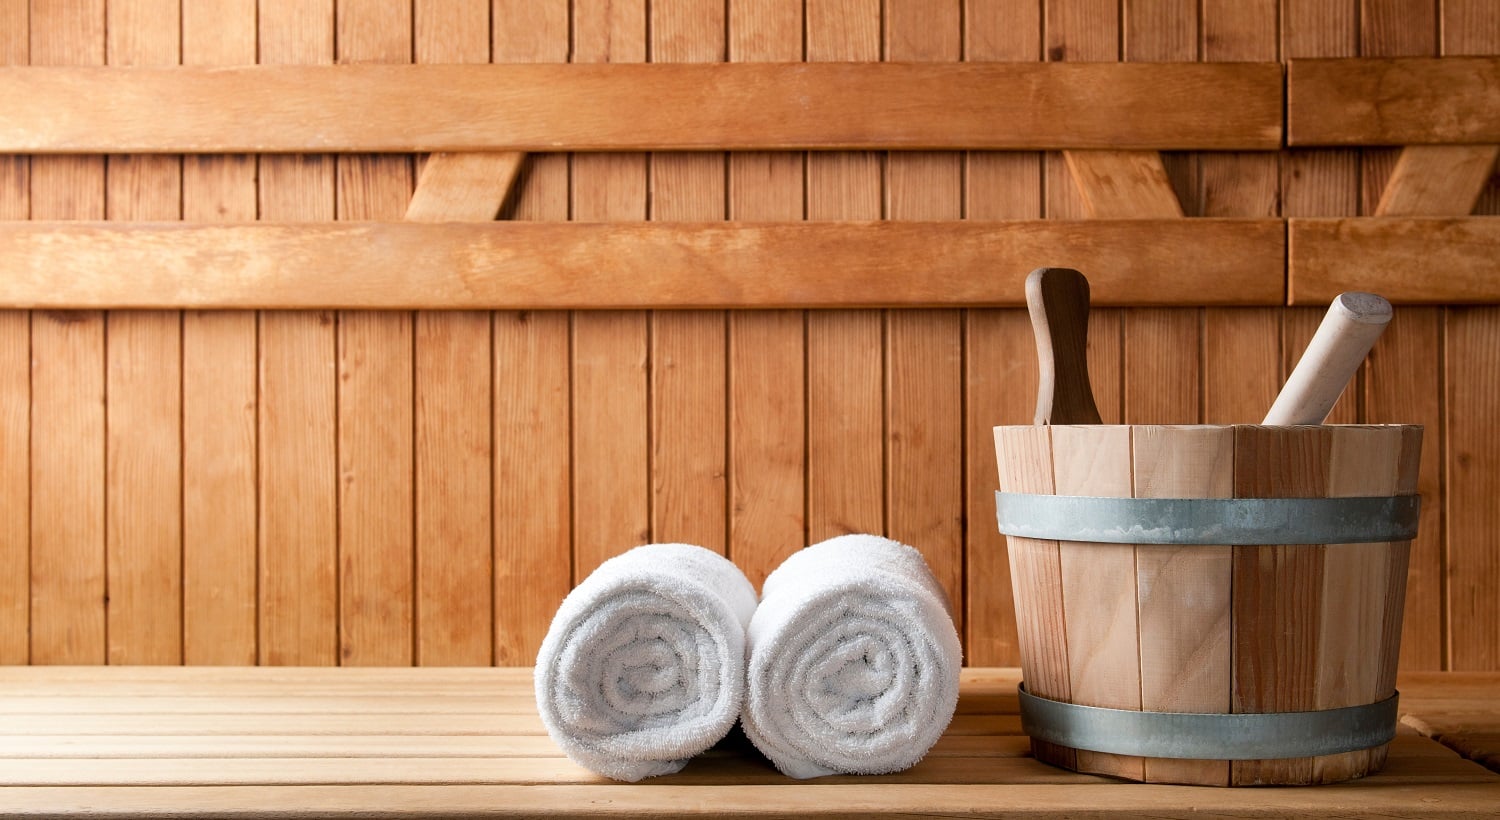 Detail of bucket and white towels in a sauna